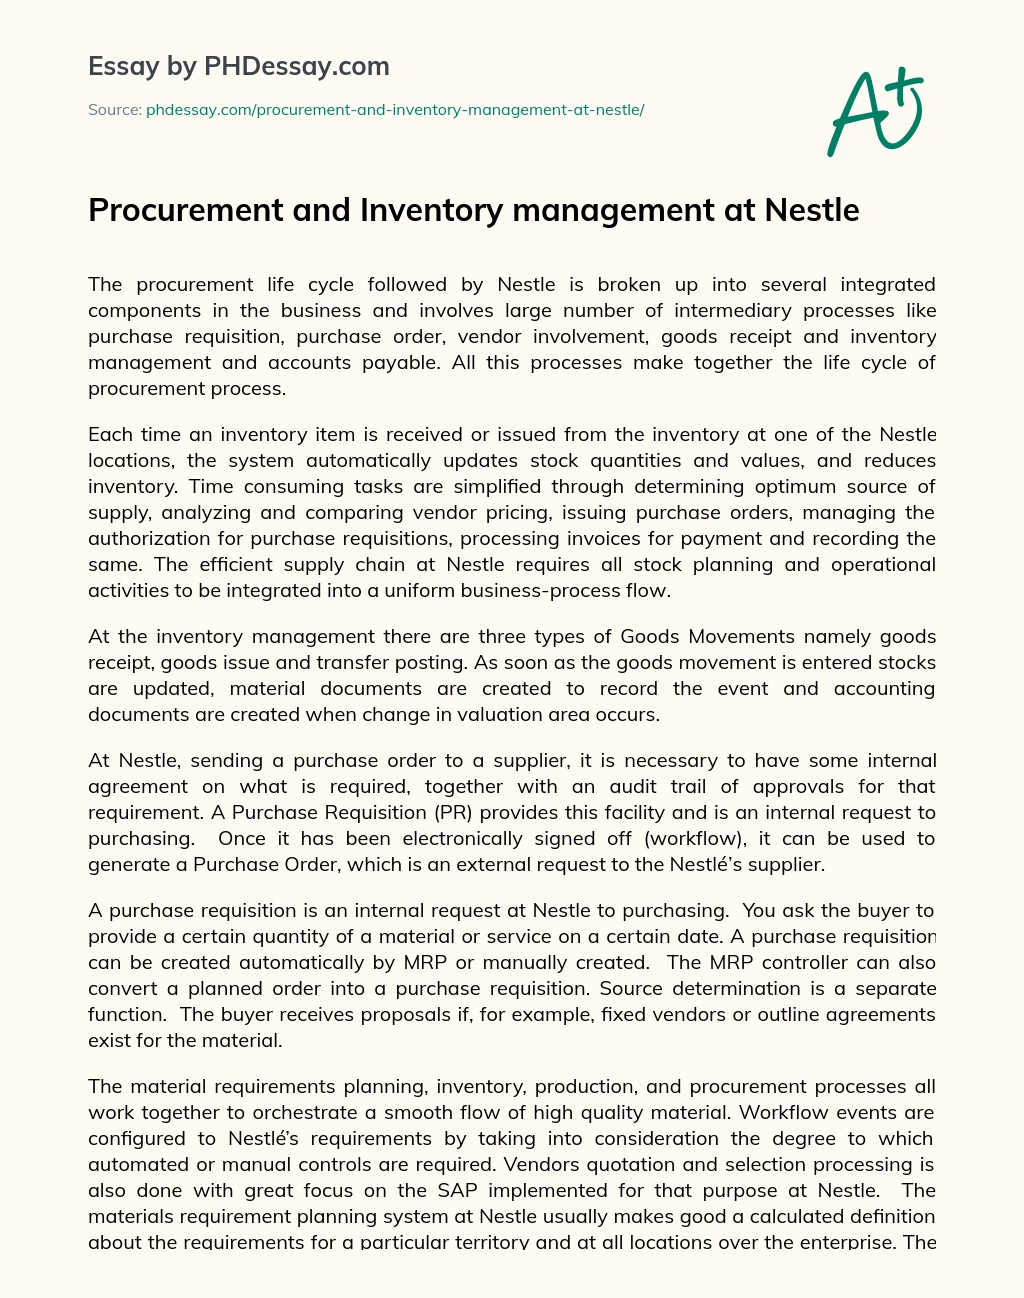 Procurement and Inventory management at Nestle essay